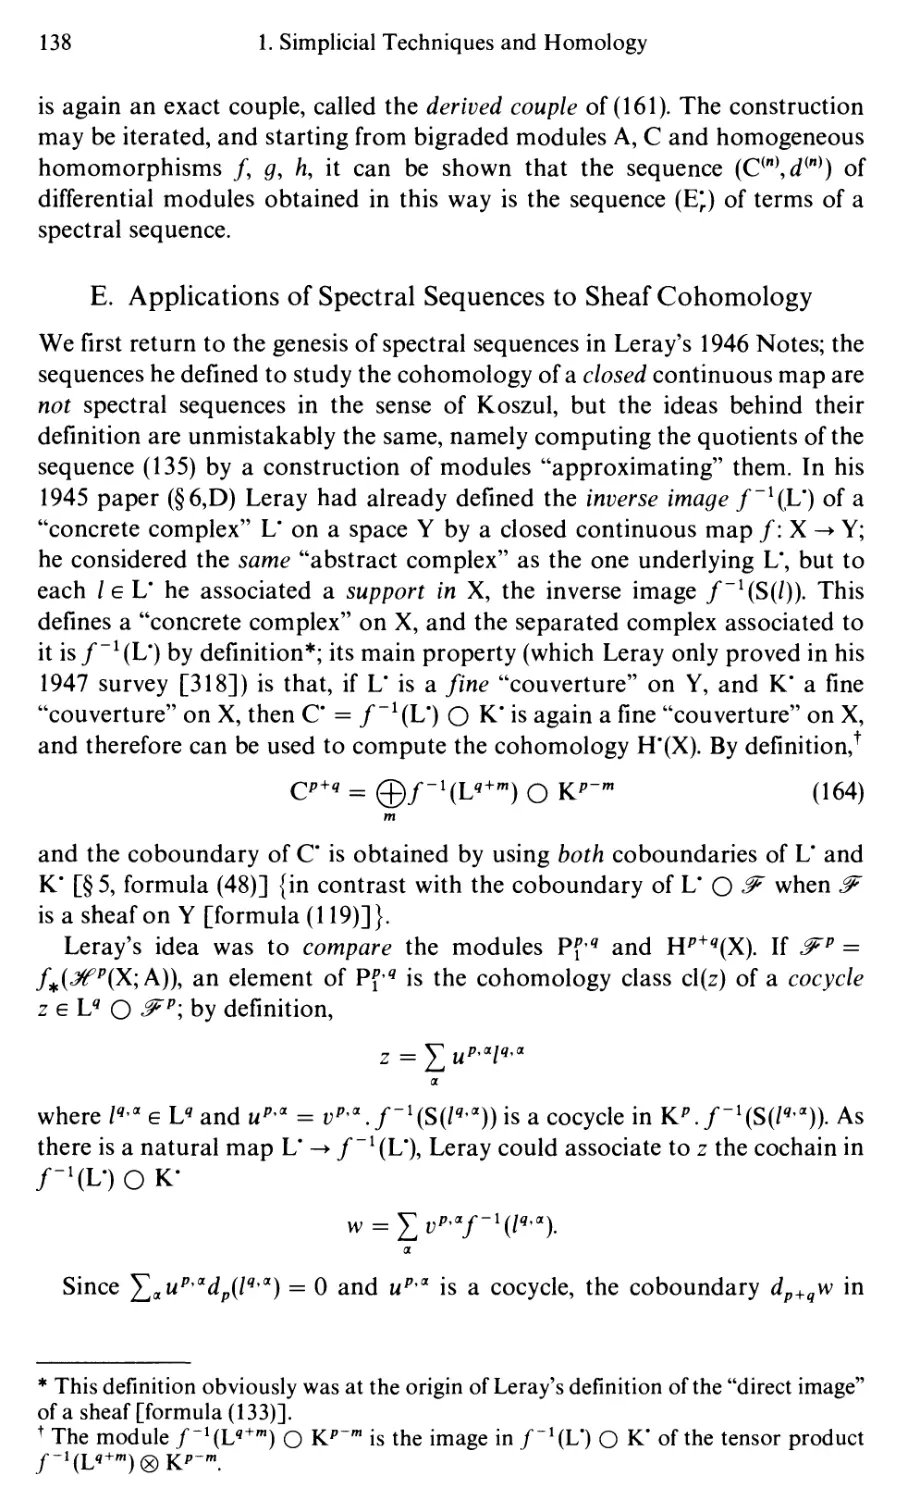 E. Applications of Spectral Sequences to Sheaf Cohomology